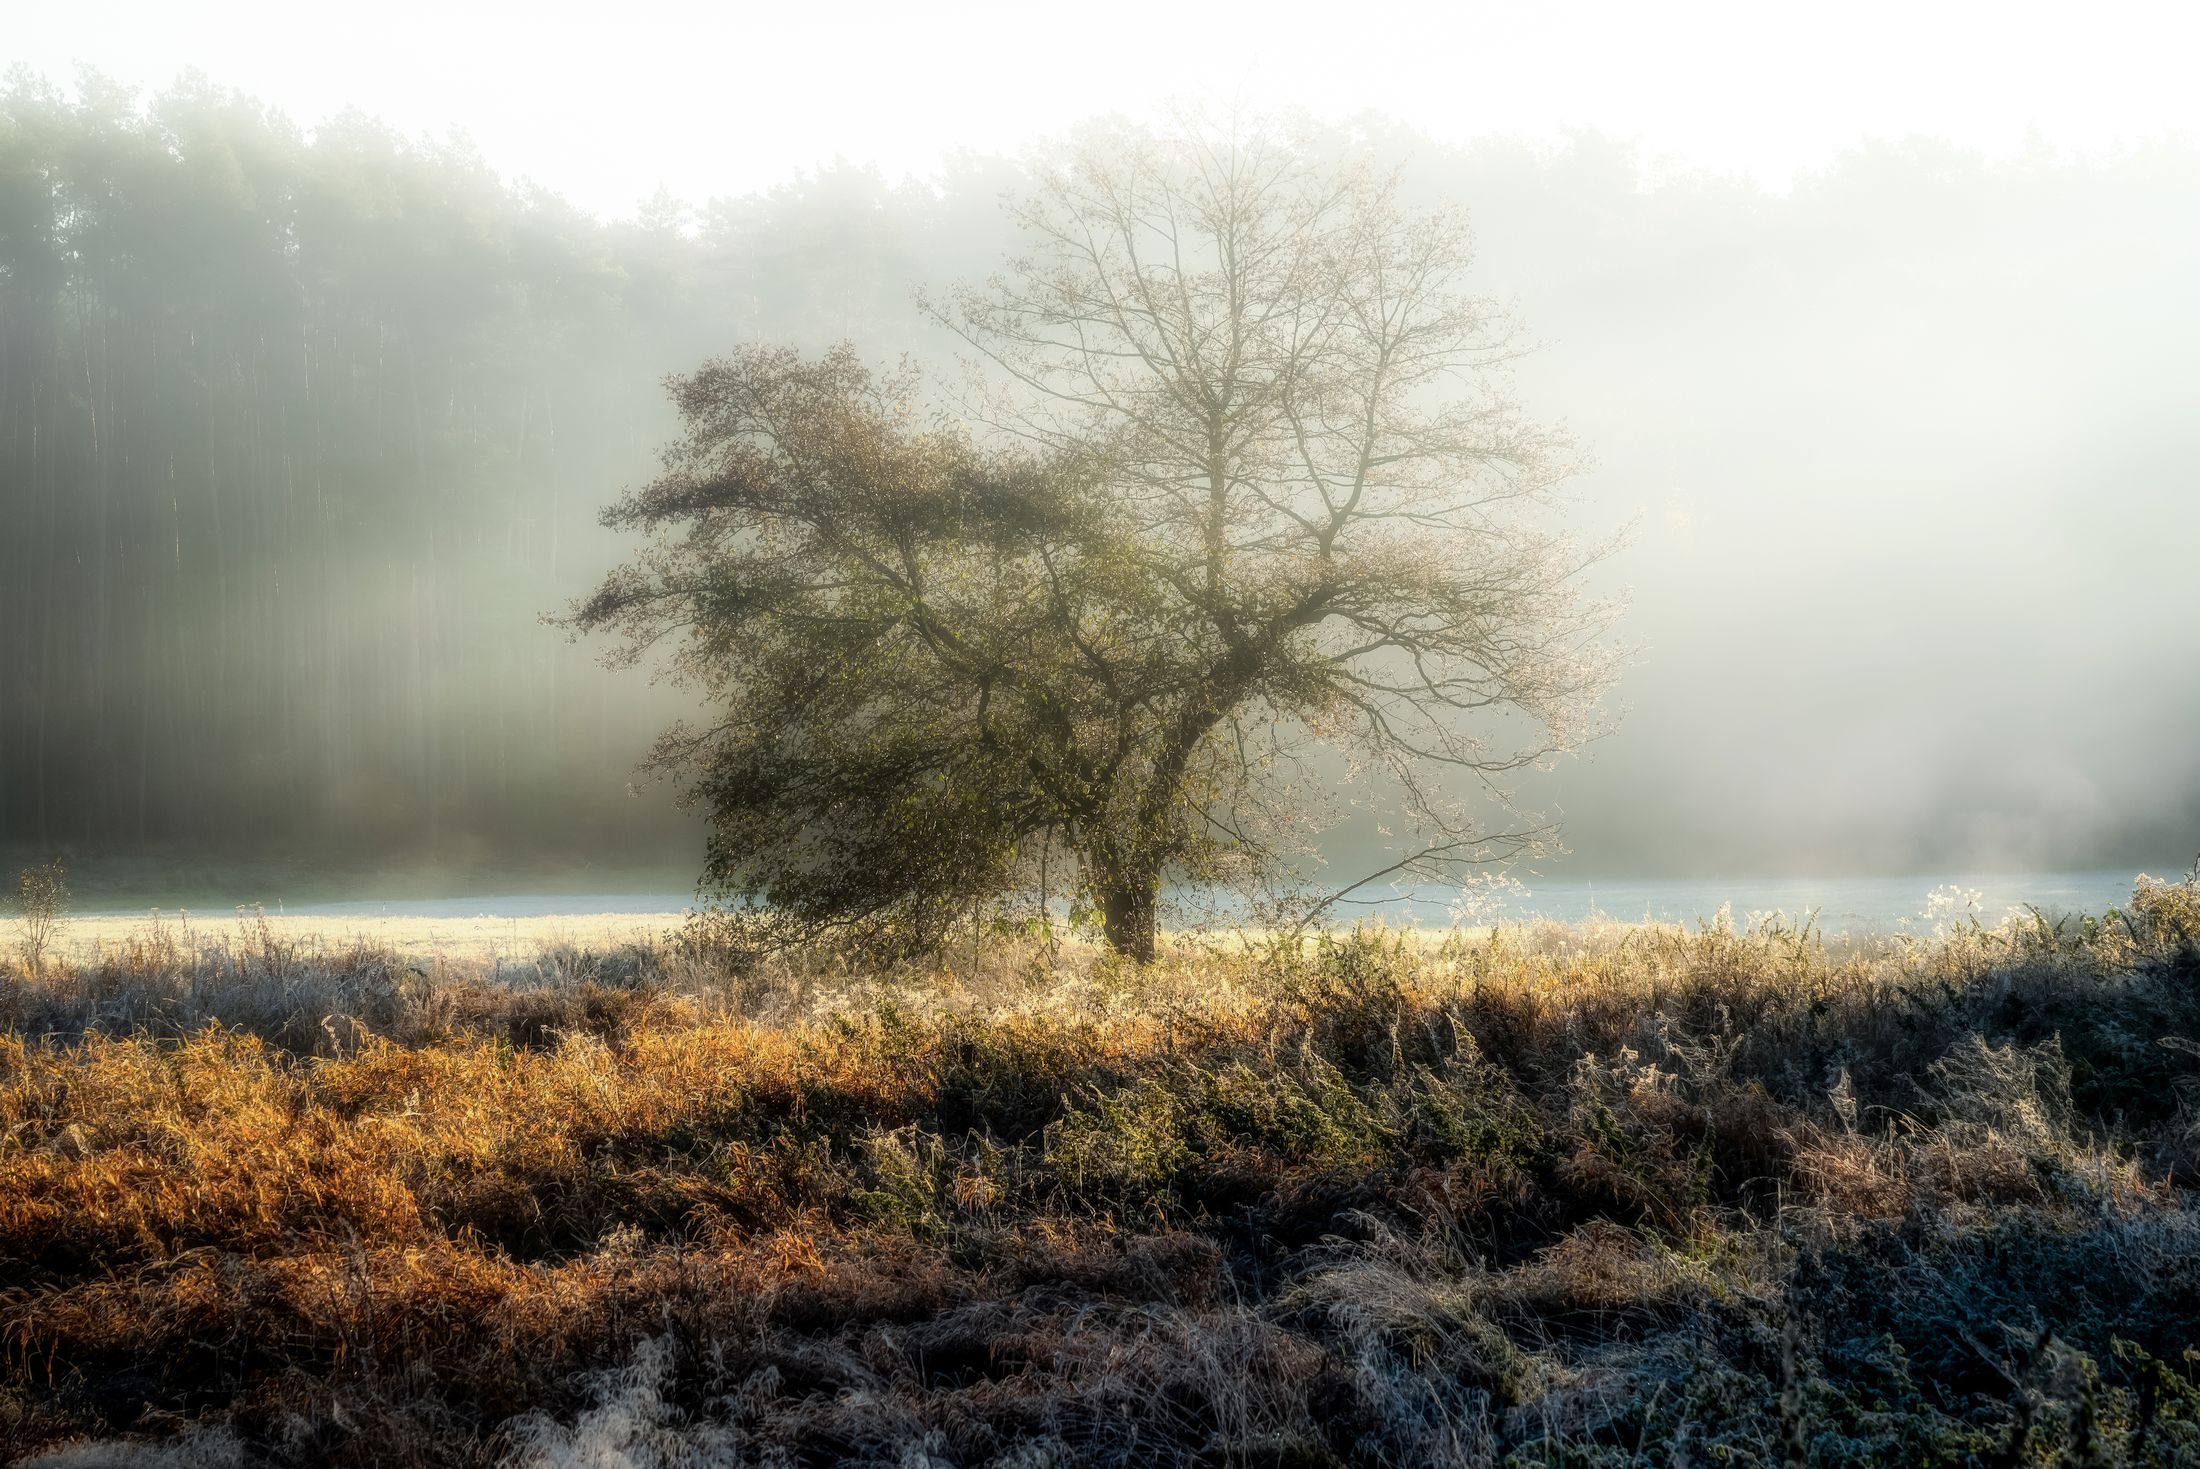 tree  autumn  fog  lonely  landscape  atmosphere  light  nature  dawn  Landscape - Scenery  Scenics - Nature  Sky  Photography  No People, Krzysztof Tollas